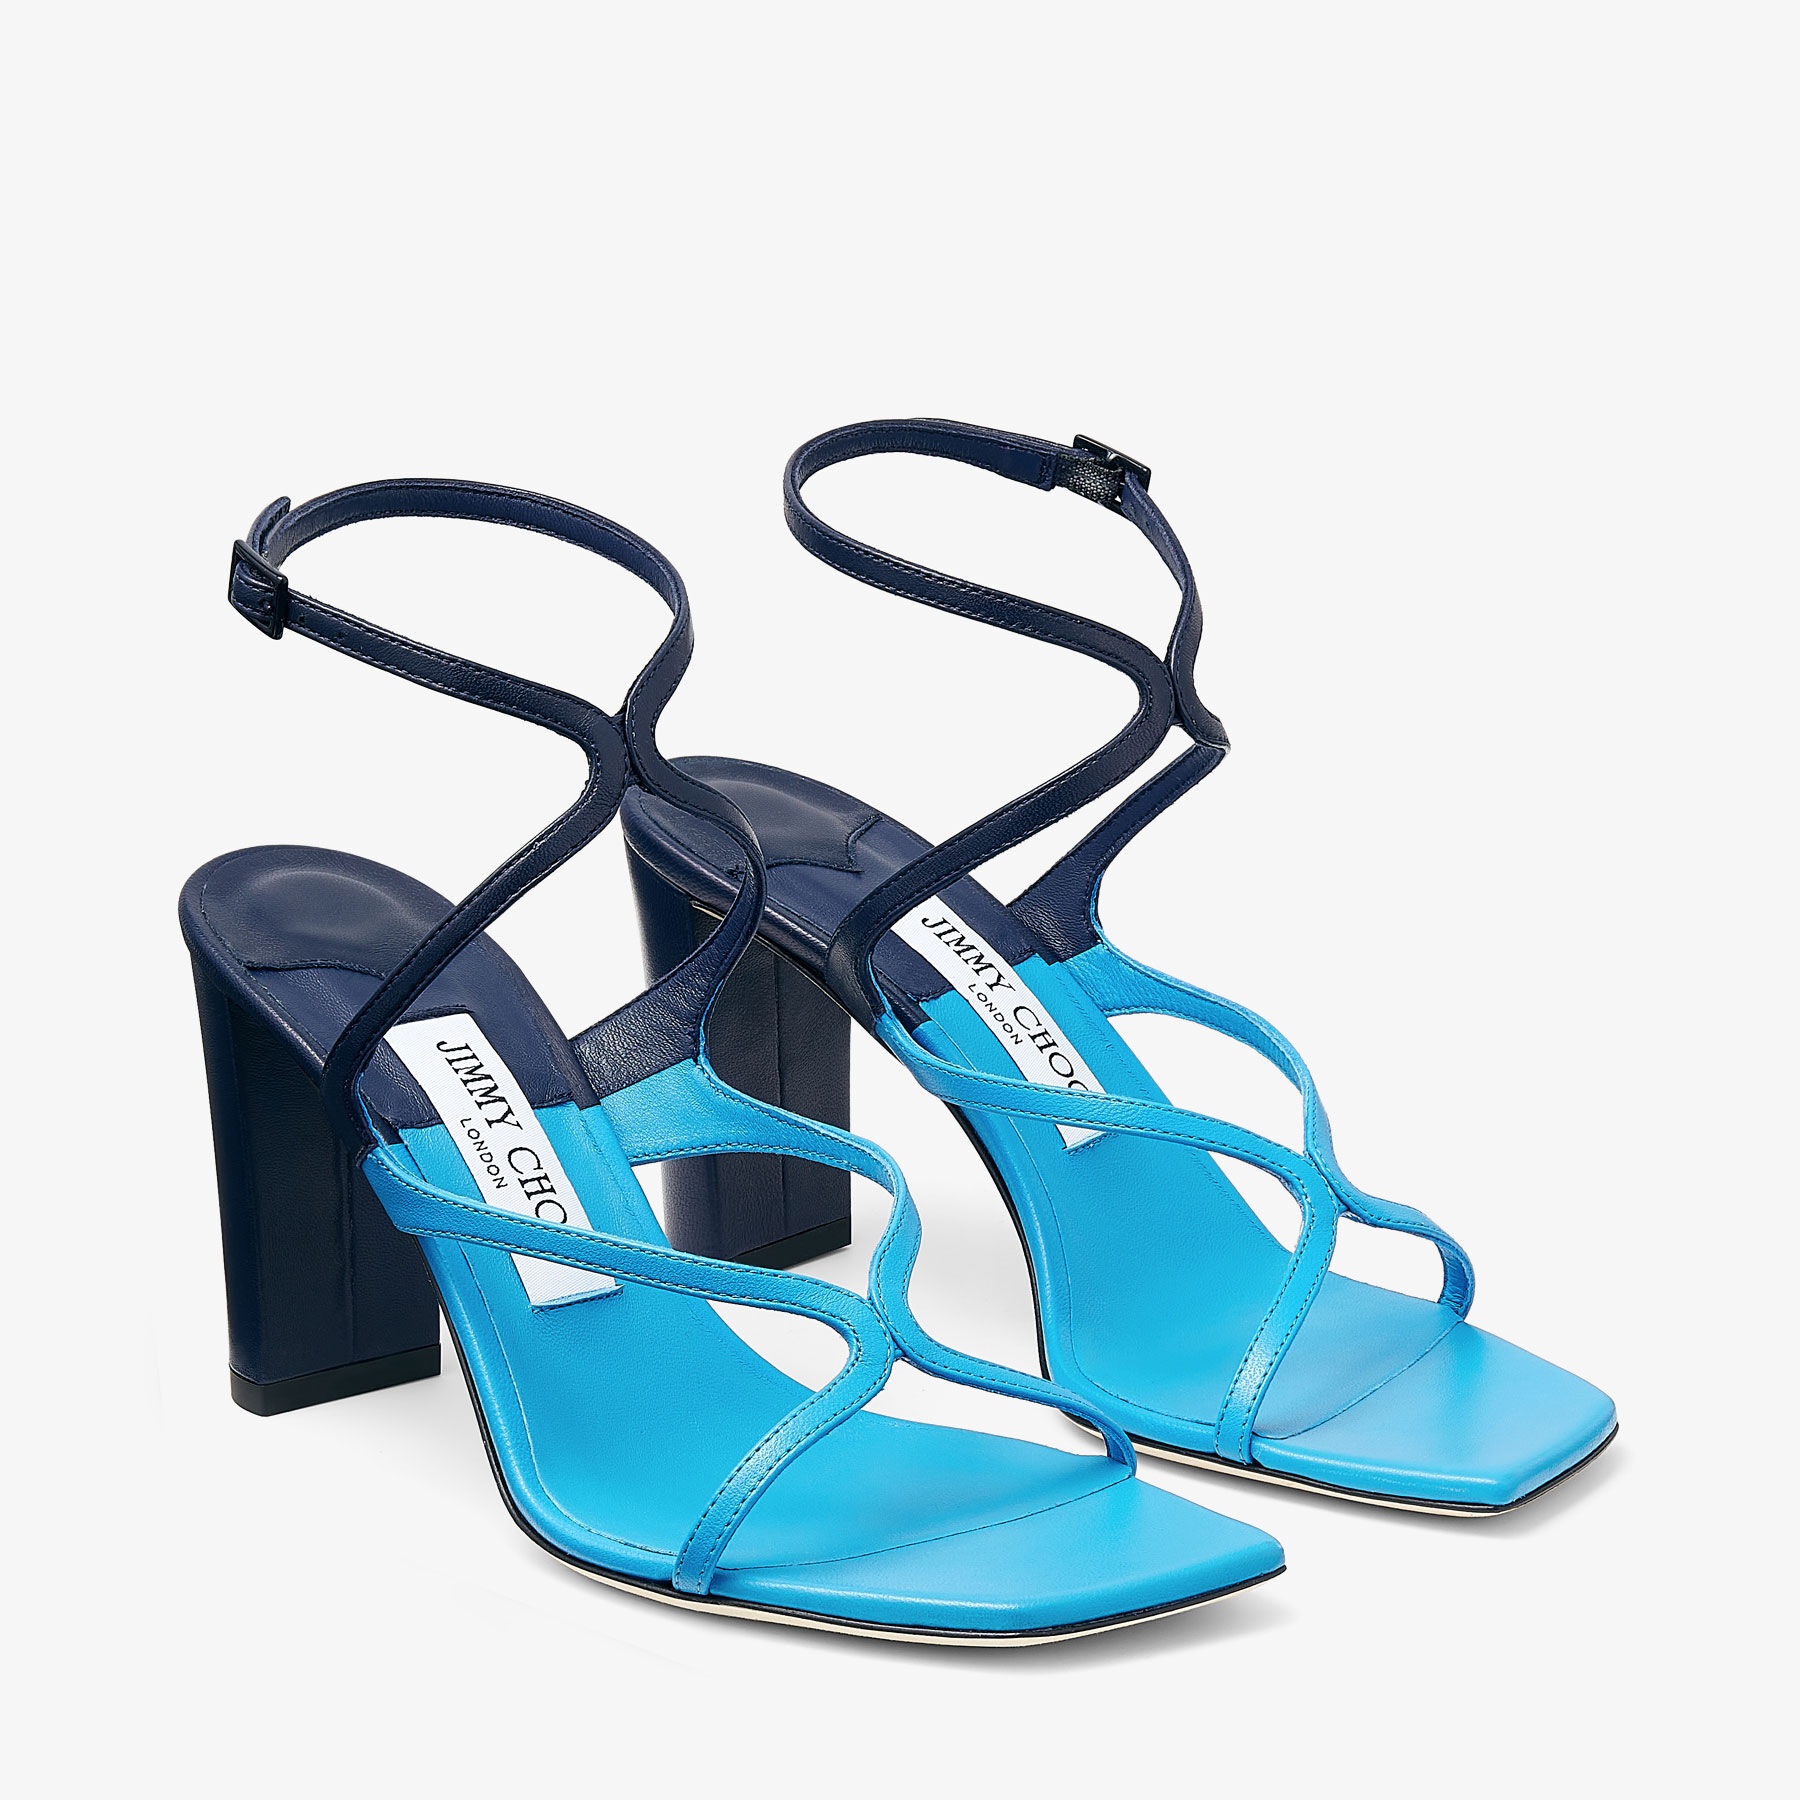 Azie 85
Sky and Navy Patchwork Nappa Leather Sandals - 2